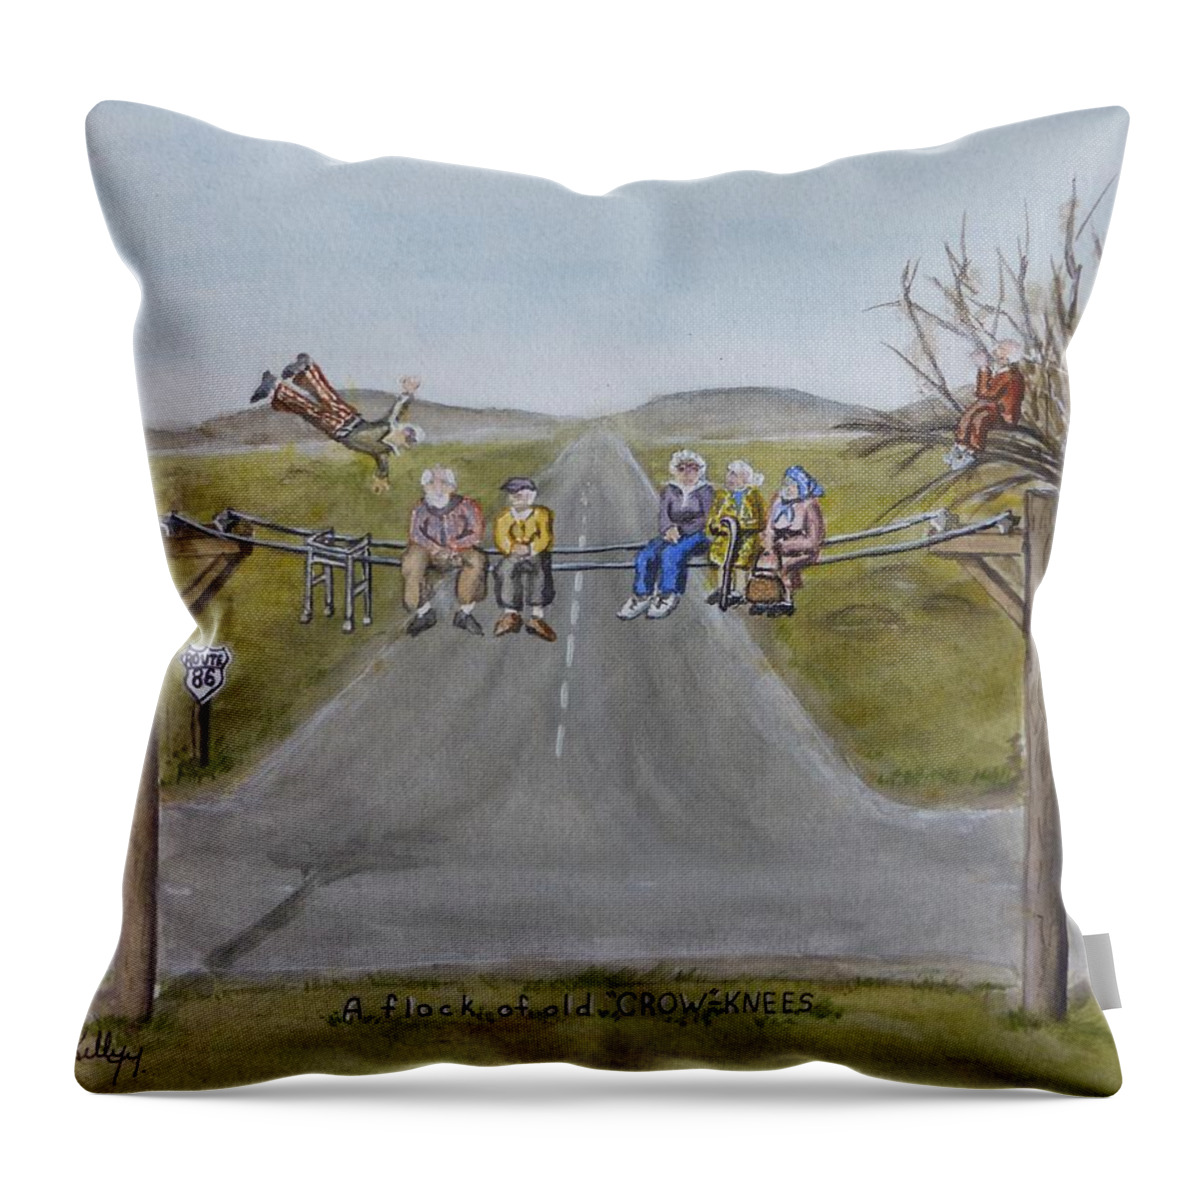 Crows Throw Pillow featuring the painting Old Crowknees fly South by Kelly Mills